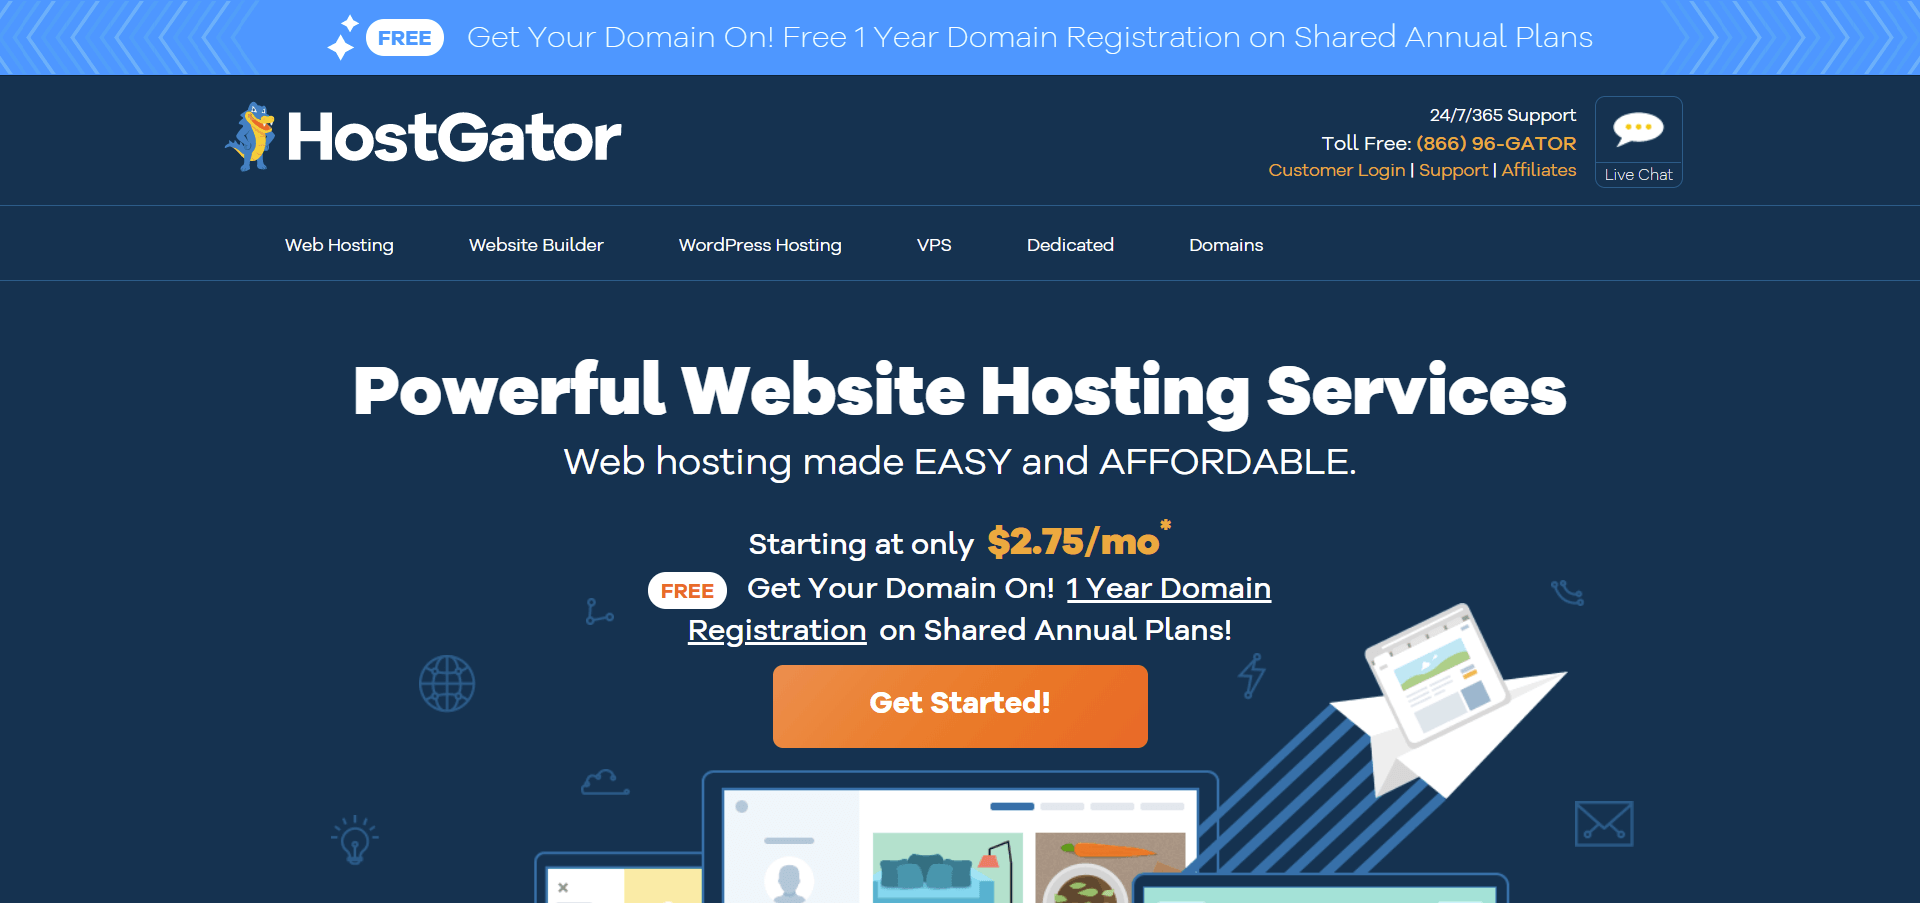 best web hosting for small business, best web hosting 2019, best web hosting for WordPress, web hosting comparison, SaaS blog, All That SaaS